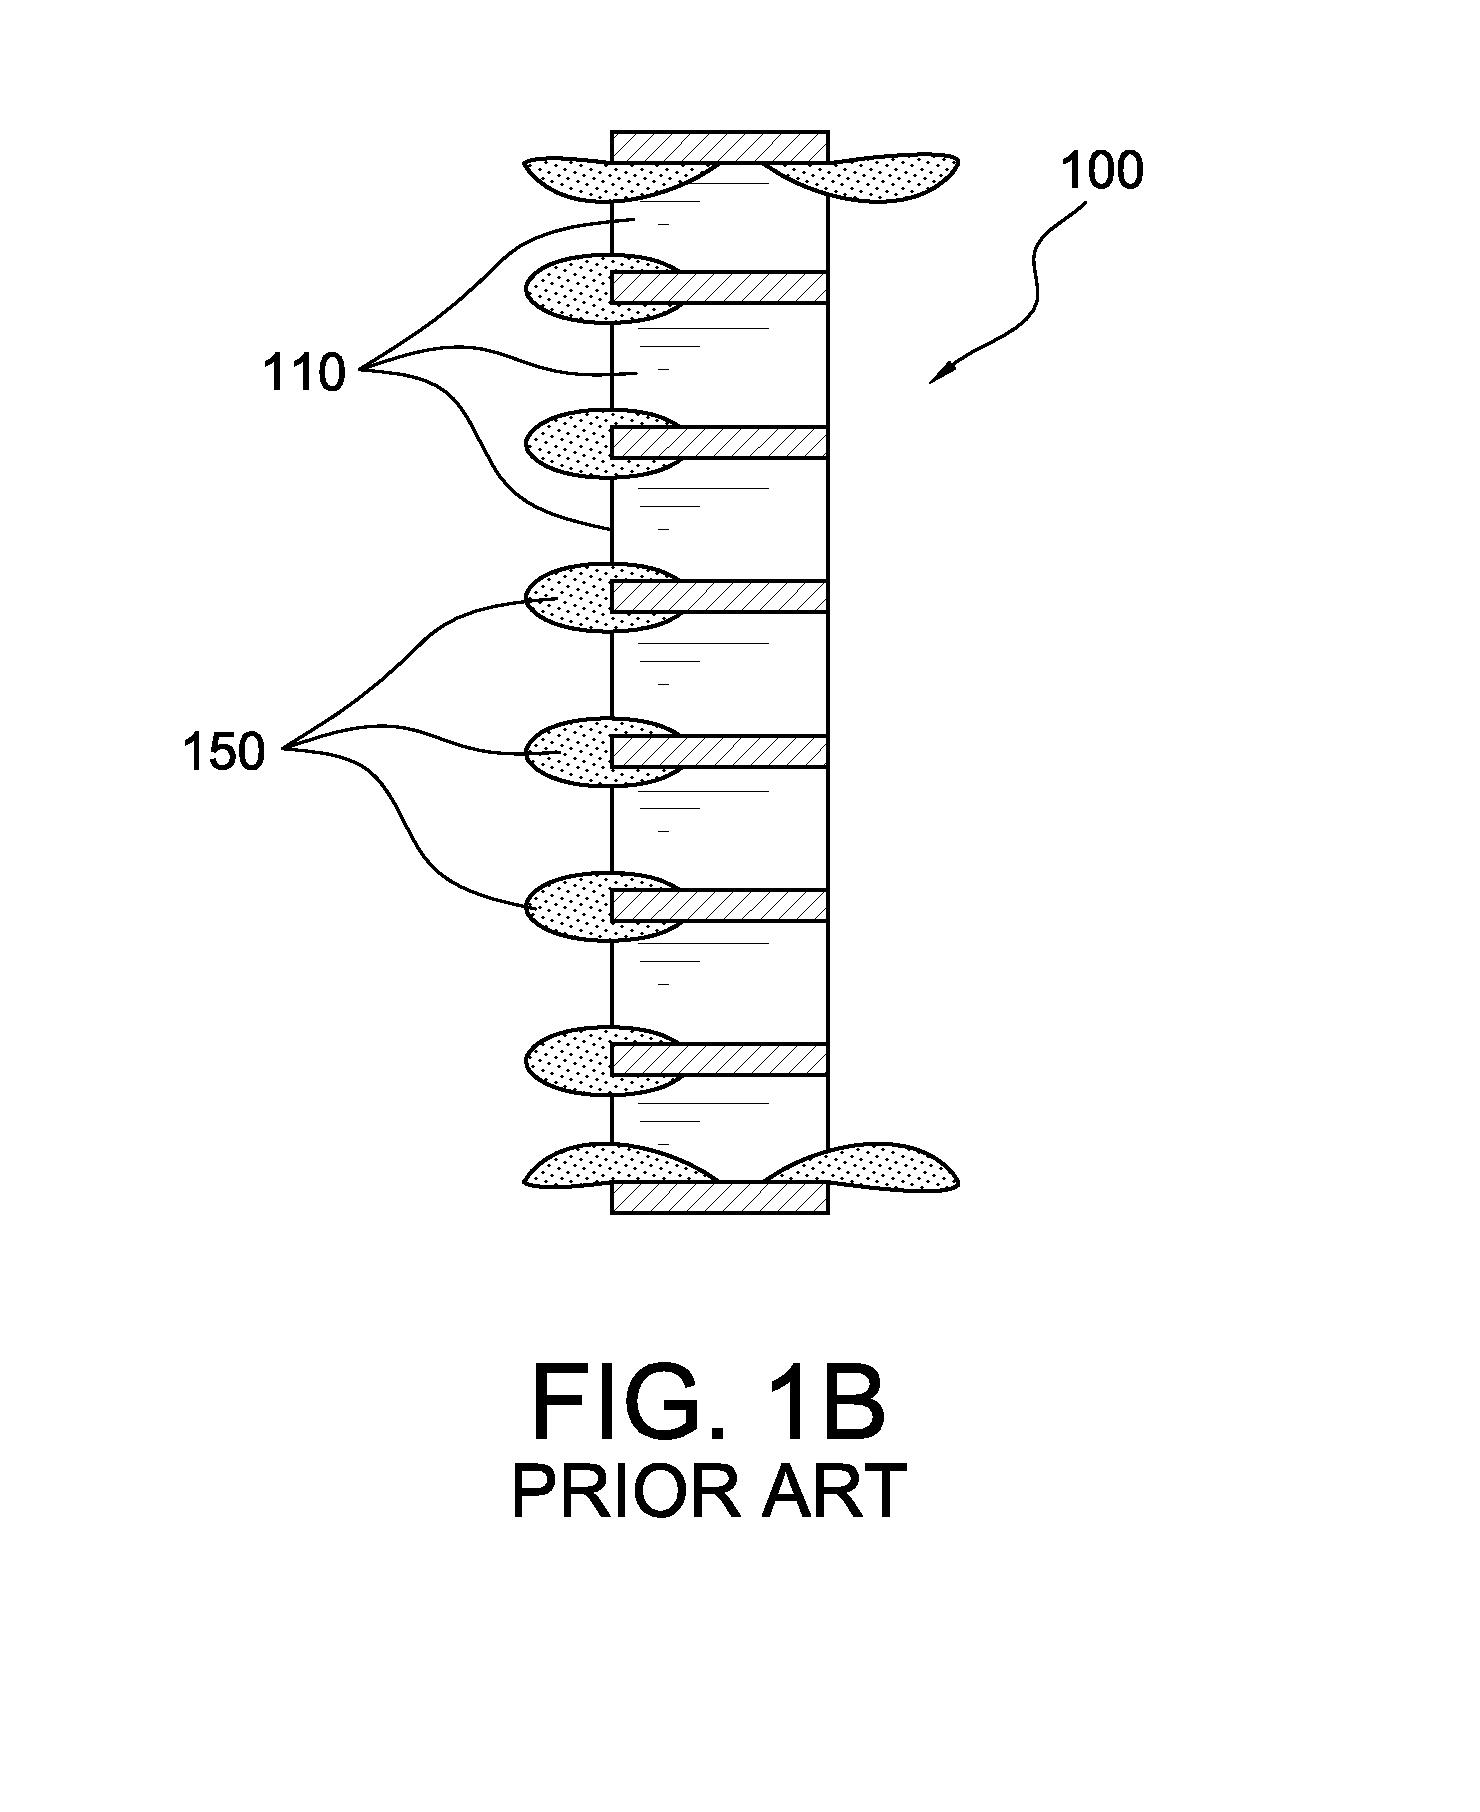 Heated Flow Conditioning Systems And Methods of Using Same